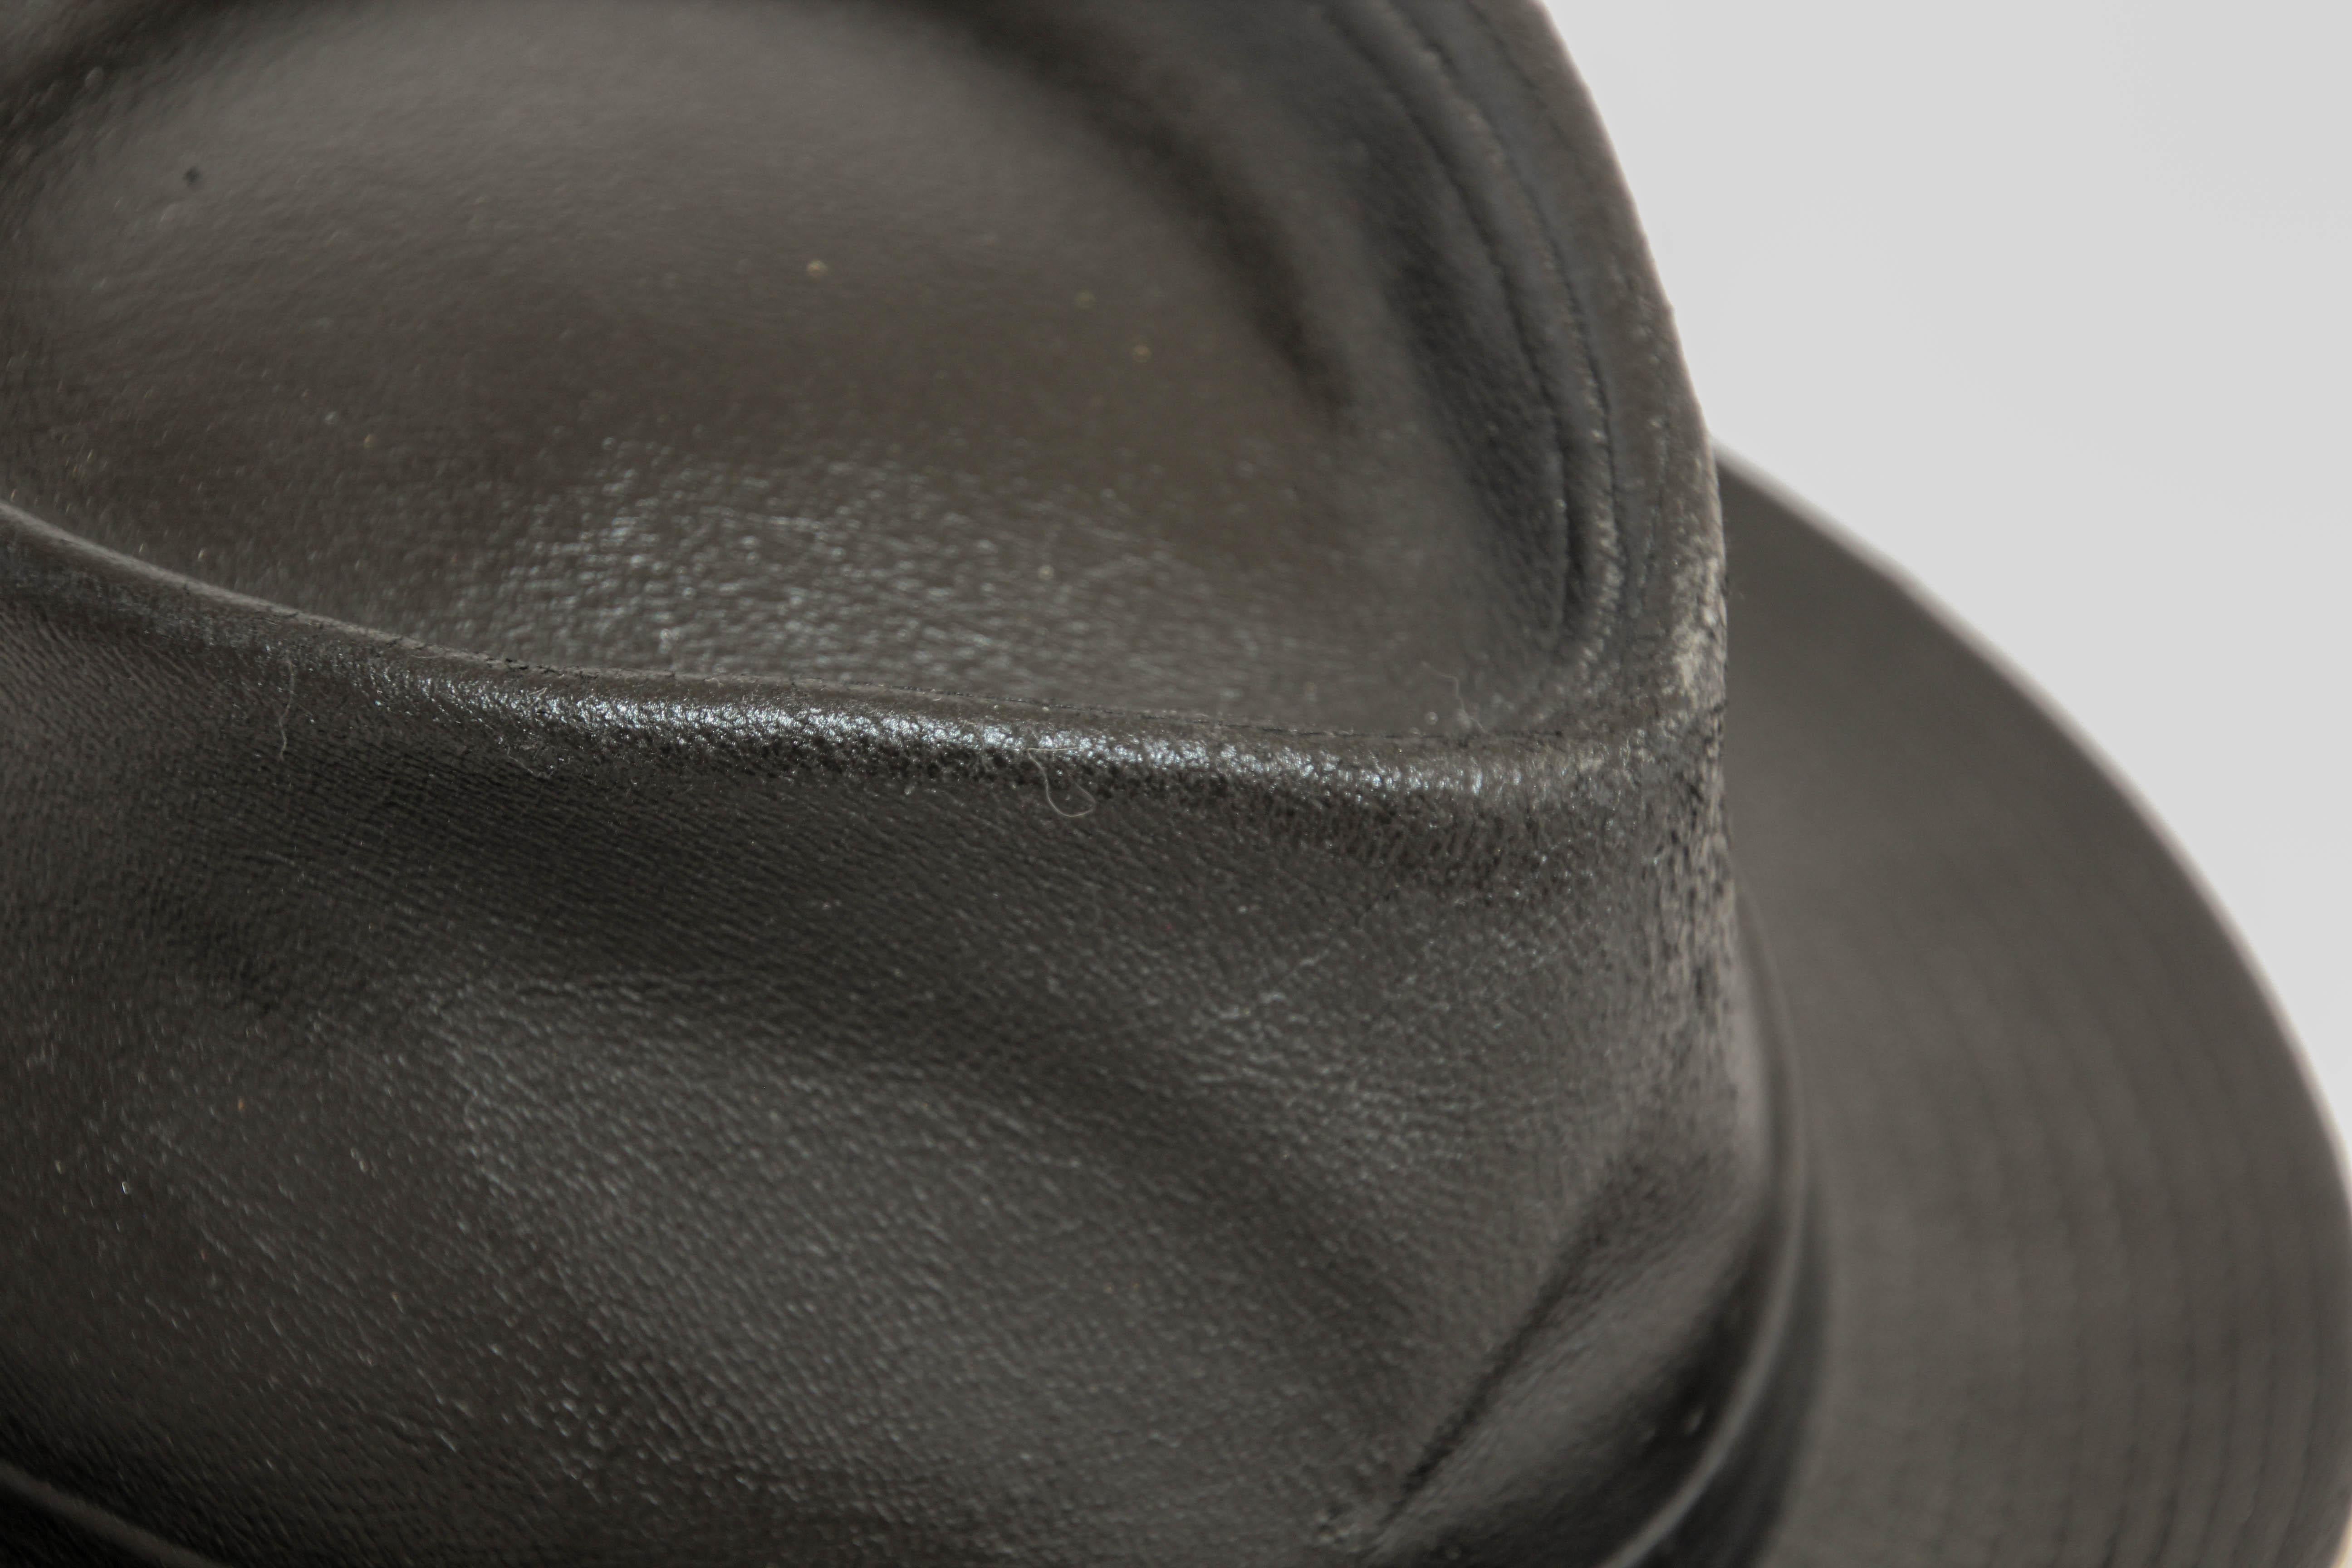 Agnes B Fedora Black Leather Hat .
Lambskin Leather Fedora Hat.
Vintage 1990s Black Leather Traditional 1920s / 30s New York Style Fedora Hat Hand crafted
A leather fedora hat with a snap brim.
Lambskin Leather Fedora Hat. 
Made of 100% lambskin